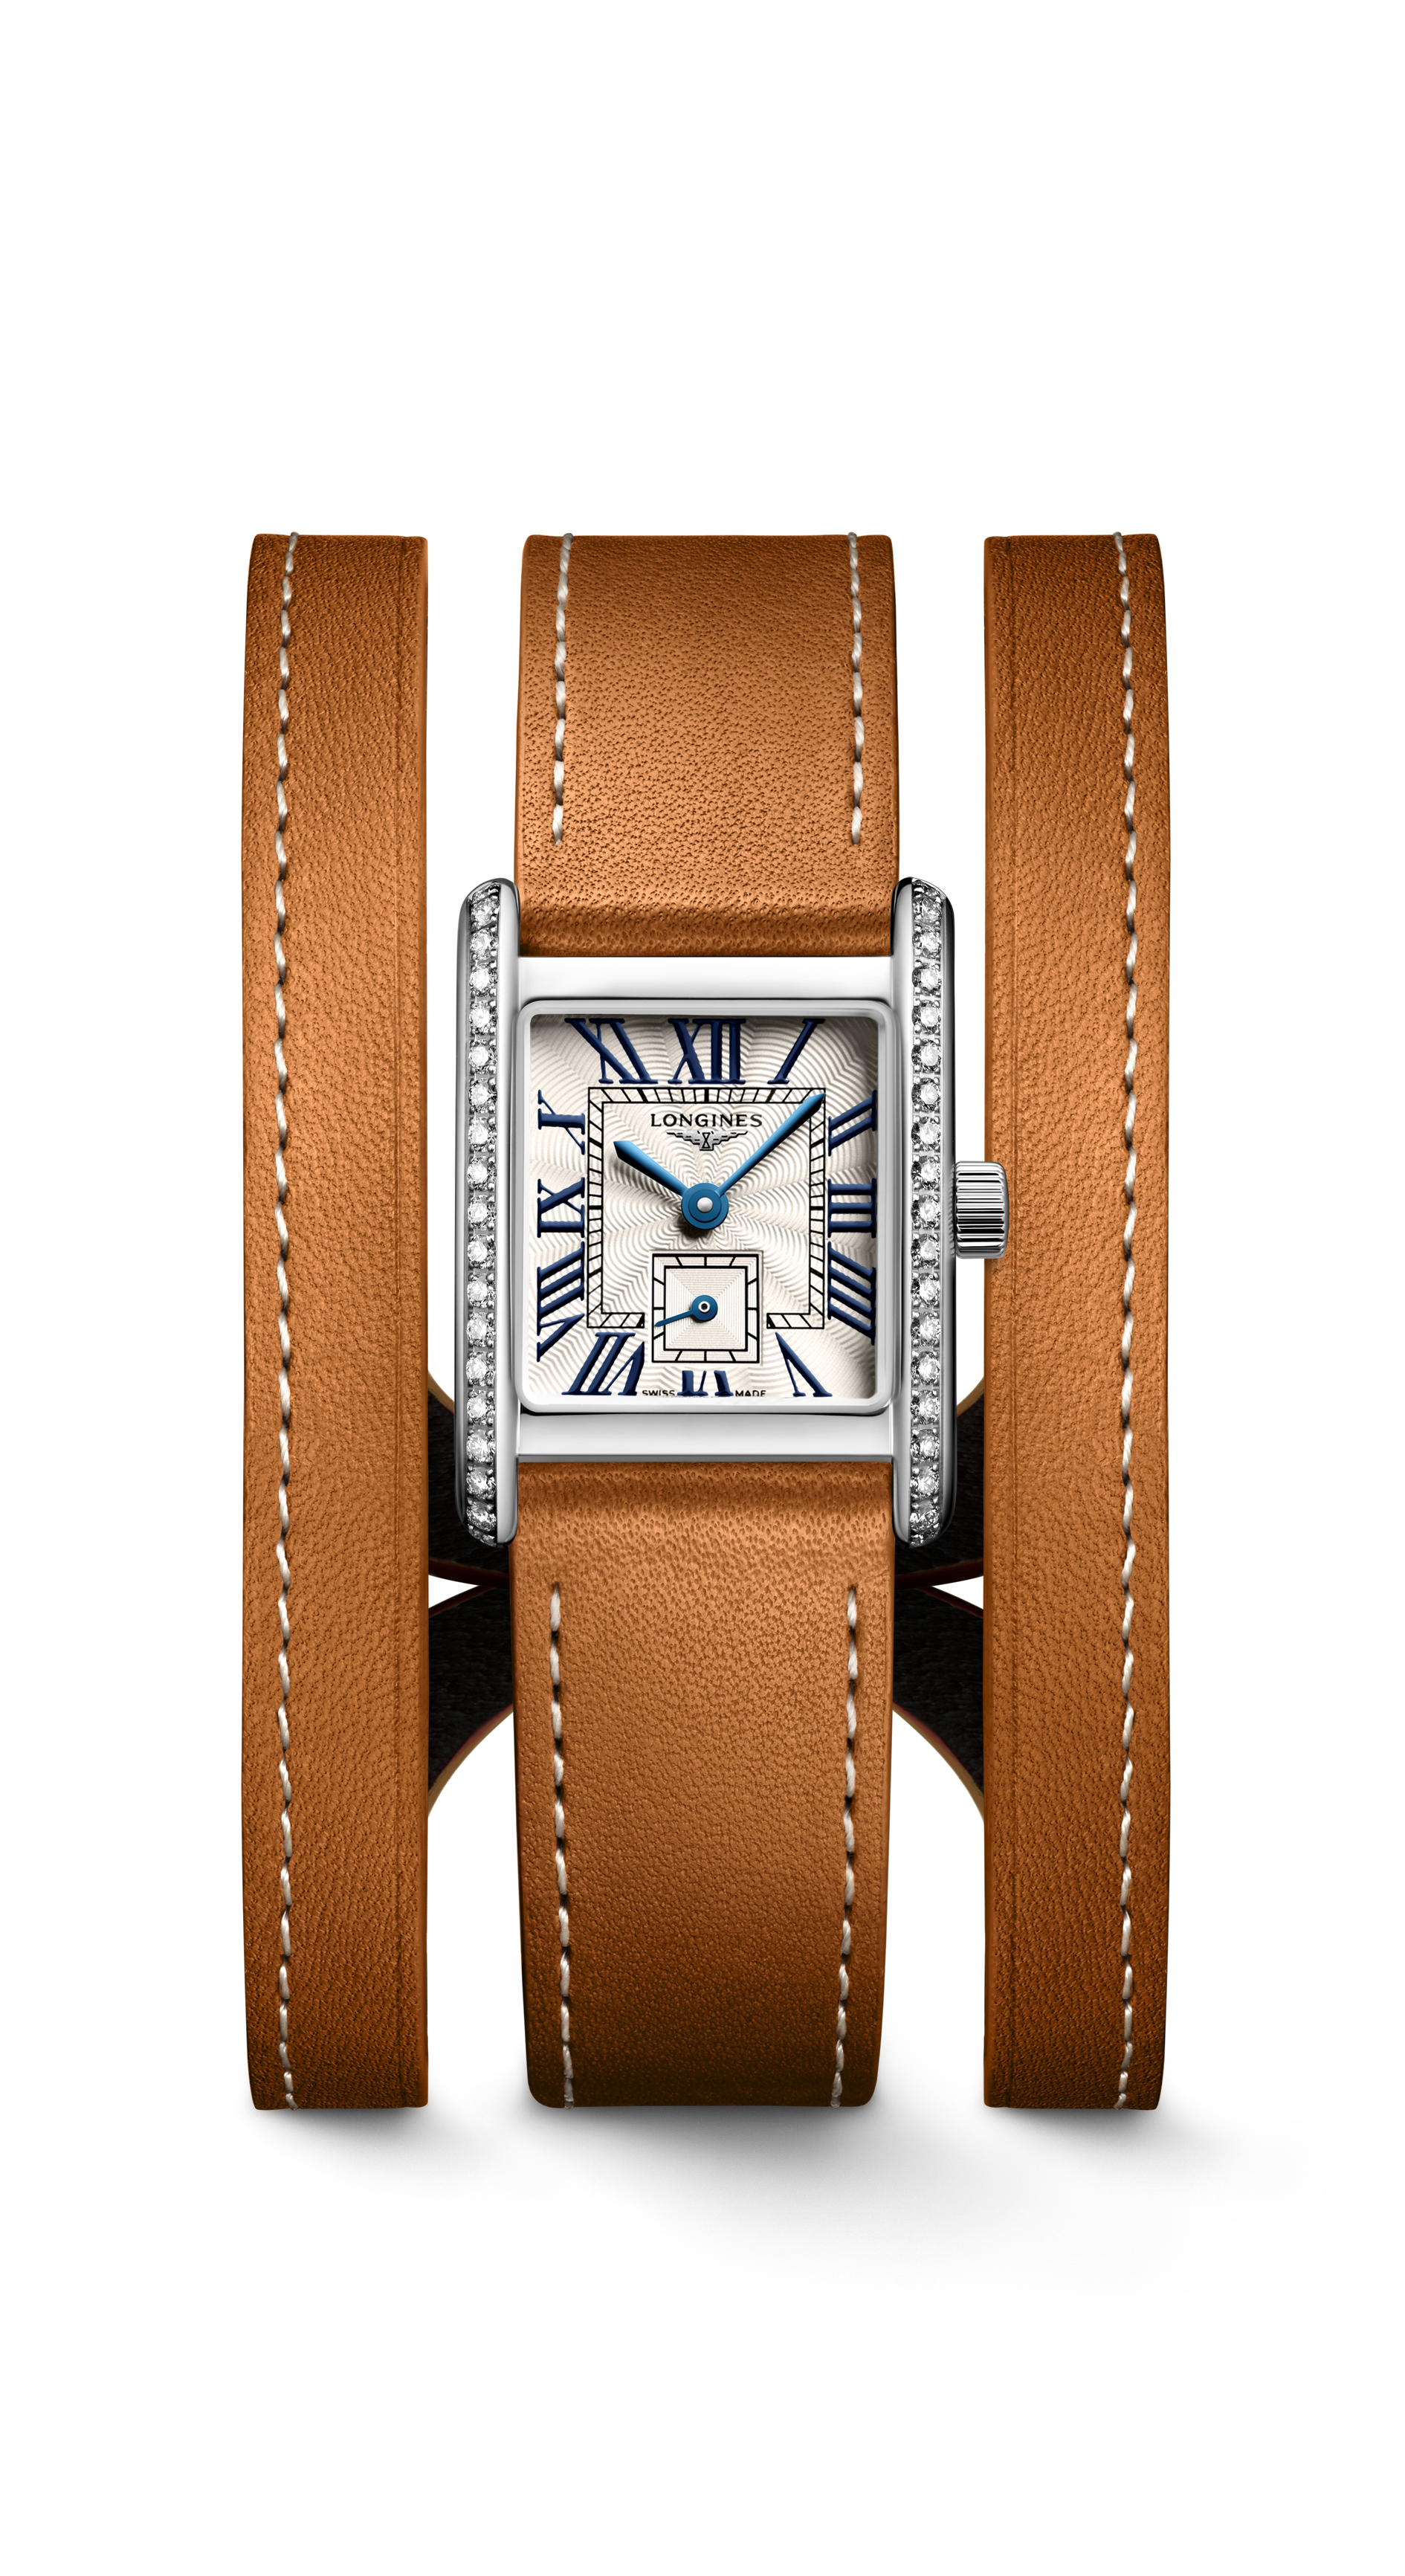 Longines gold double-strap watch with rectangular face